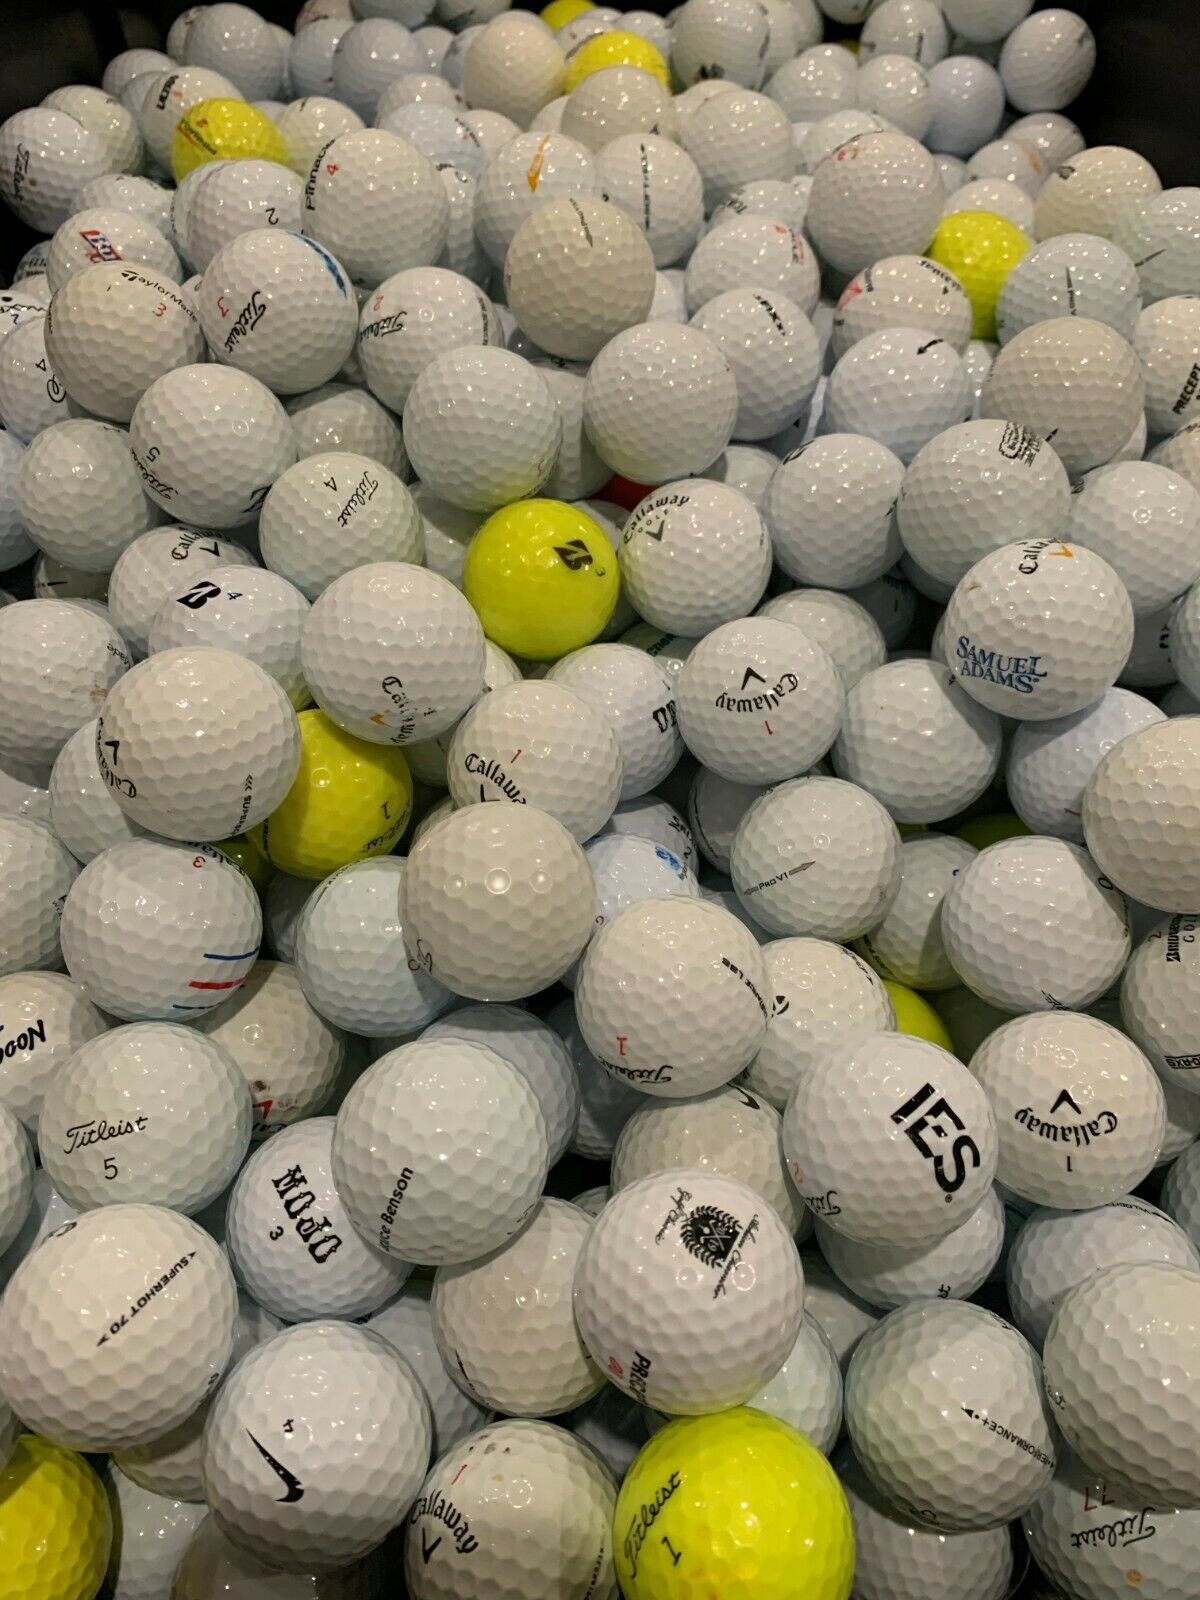 50-200 Used Golf Balls Assorted Mint Condition Select Brand, Quantity, Quality